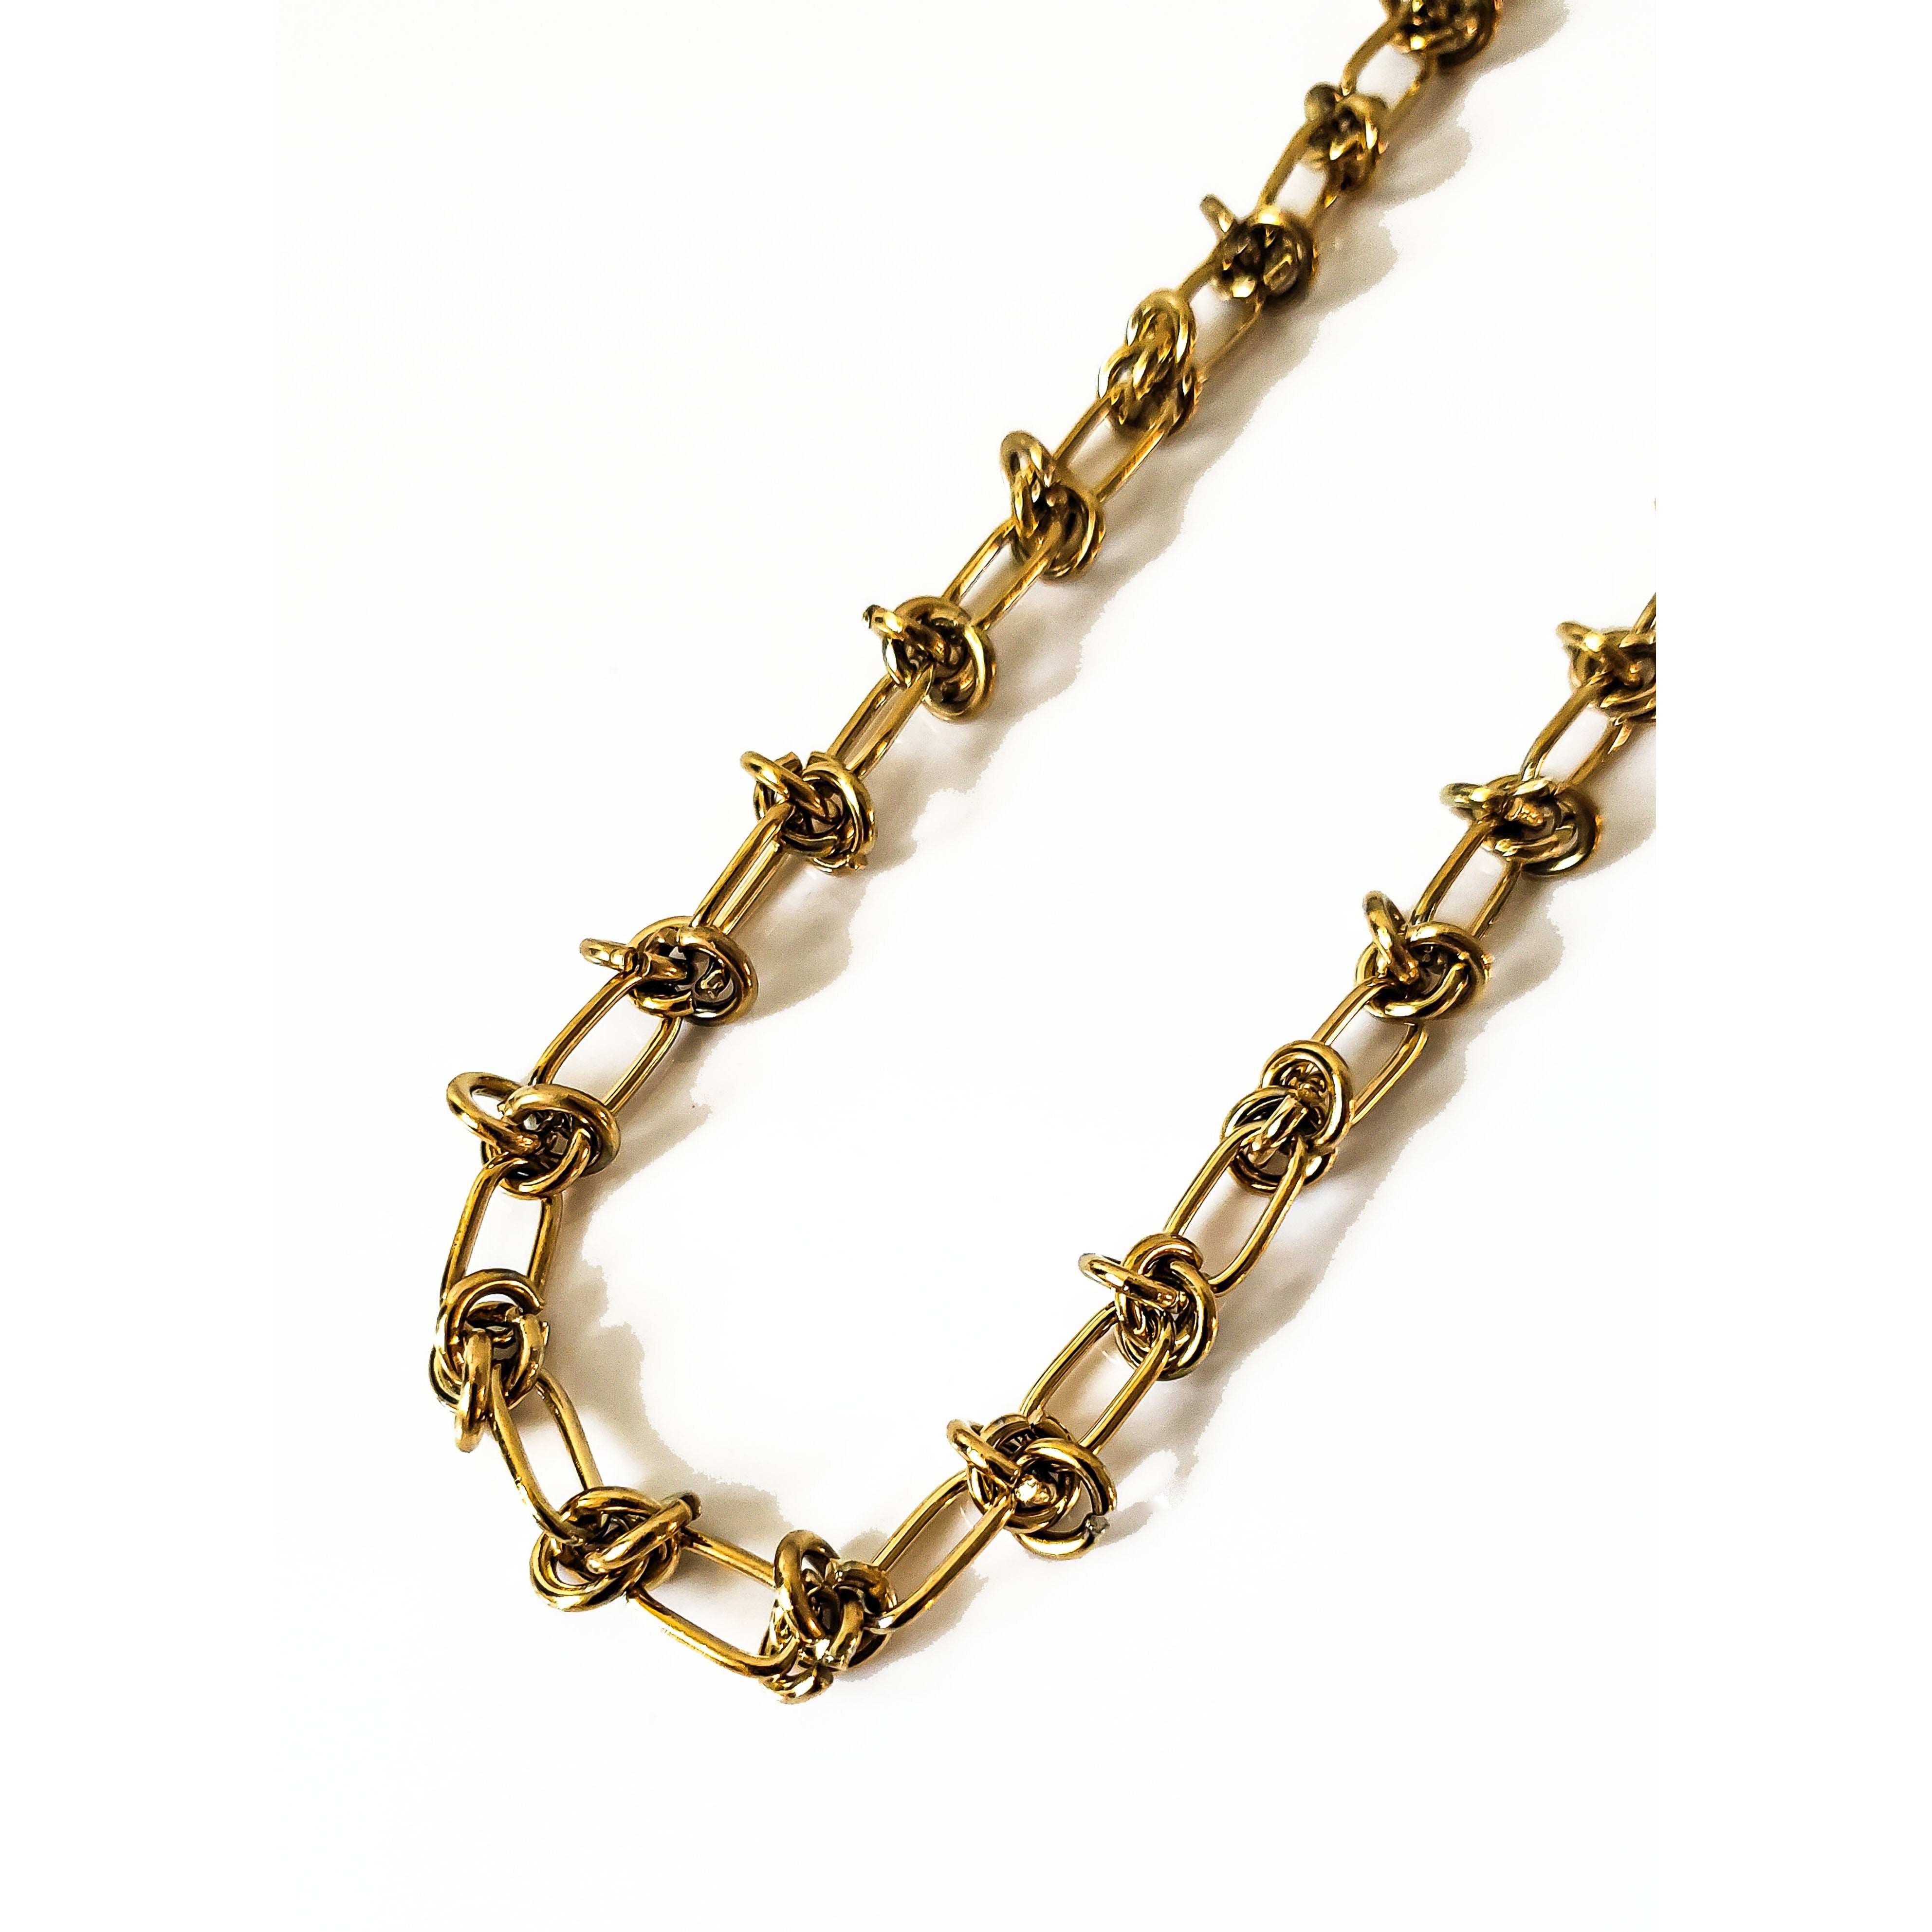 Bailey 18K Gold Barbed Knot Collar Necklace